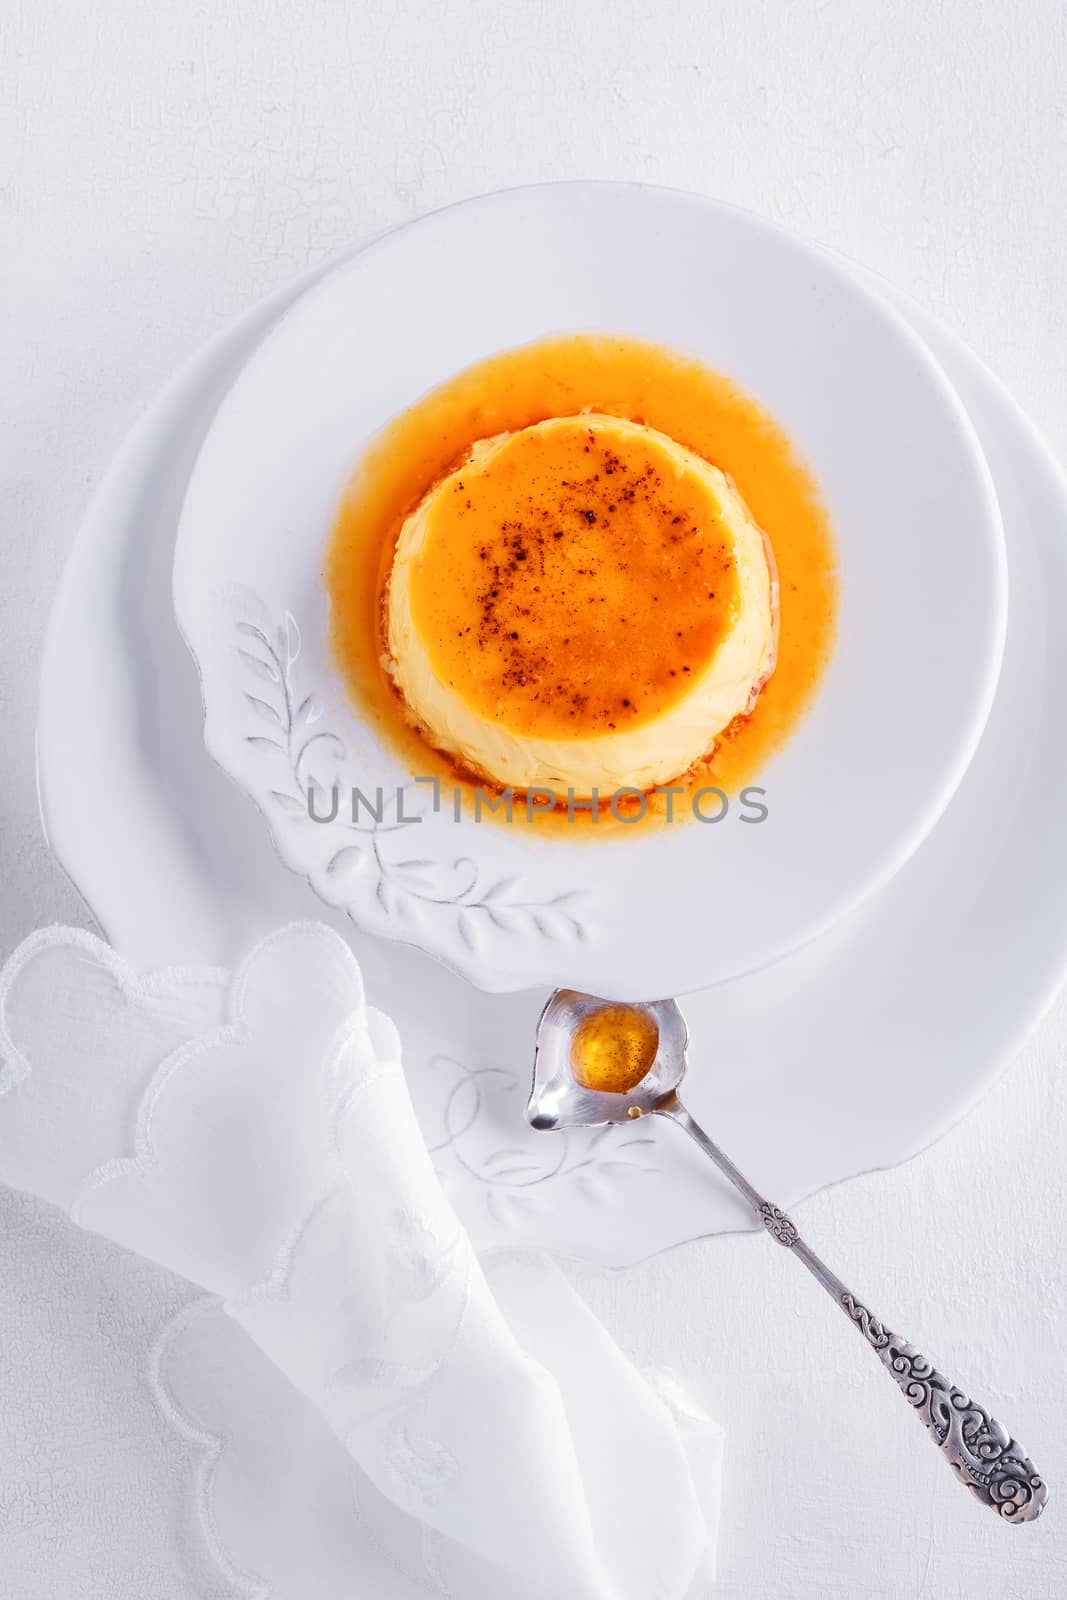 Creme Caramel on a plate served on a table.